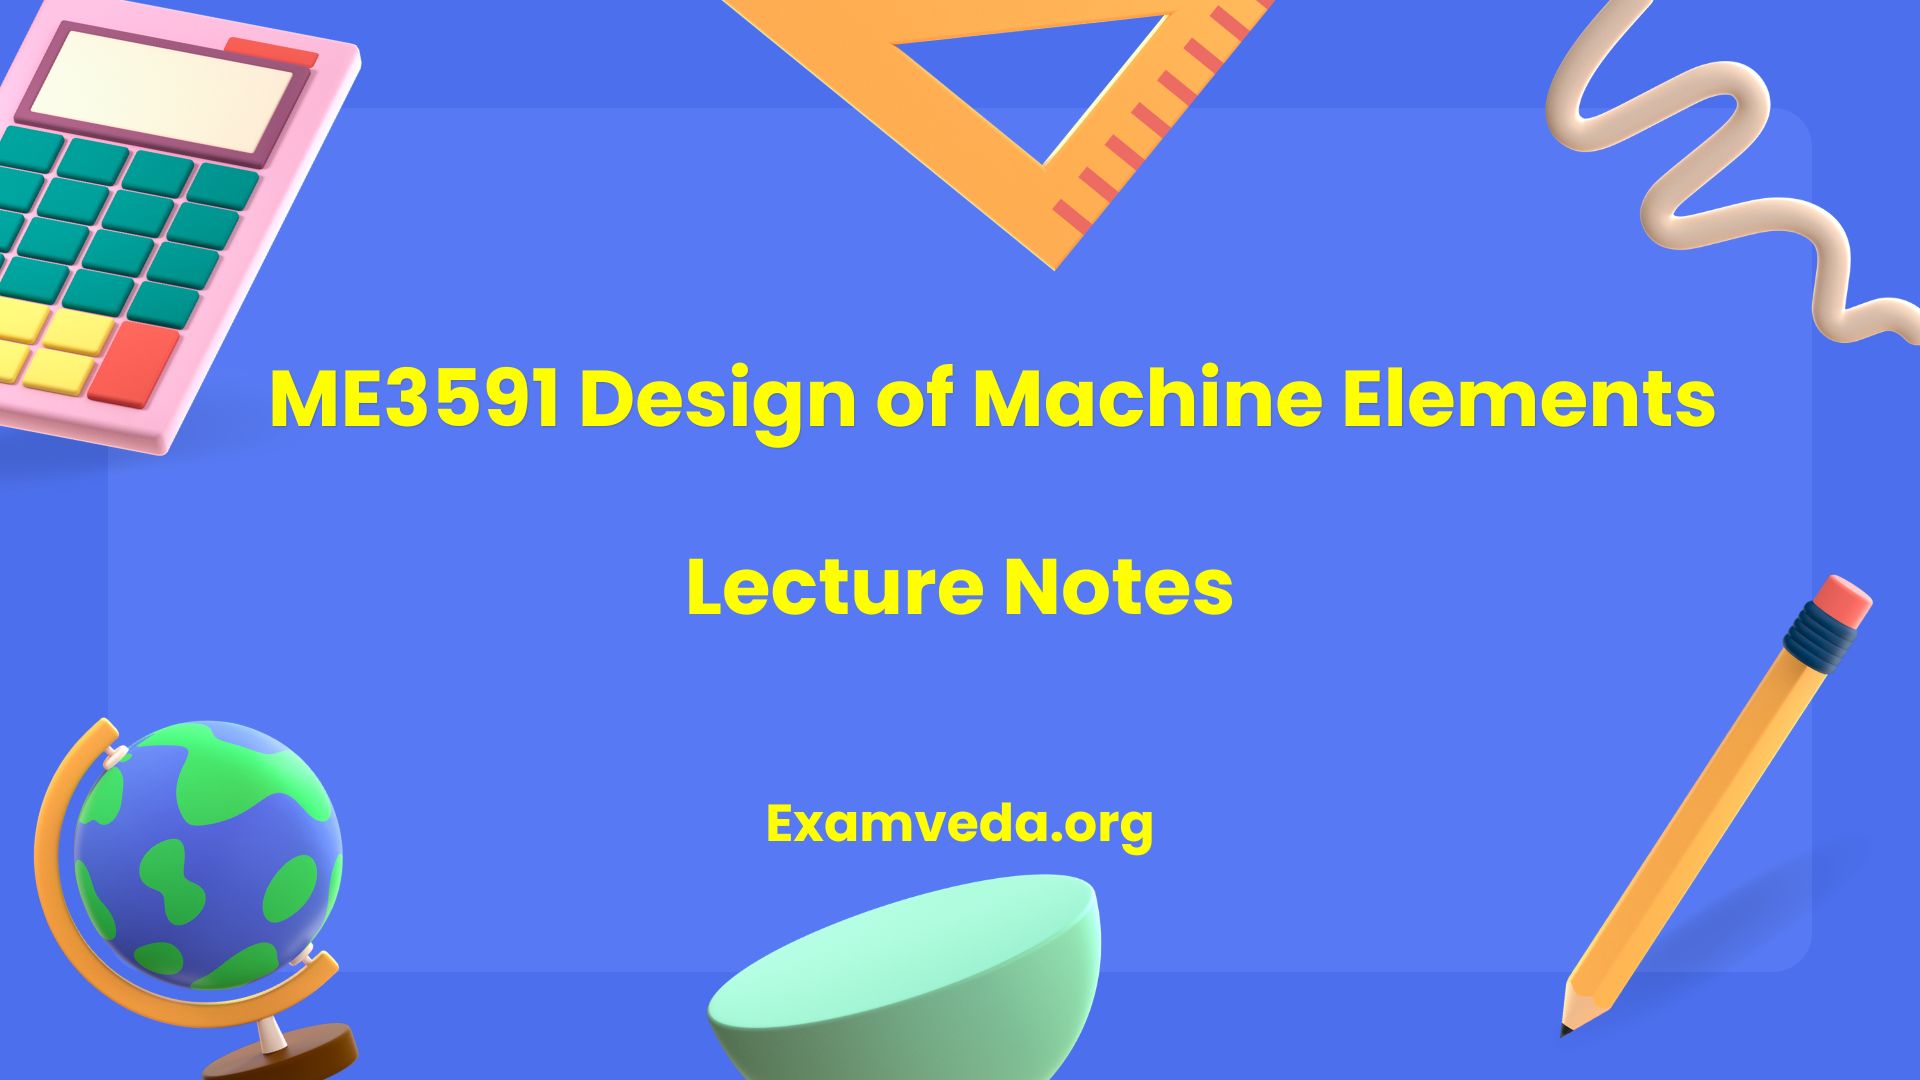 ME3591 Design of Machine Elements Lecture Notes